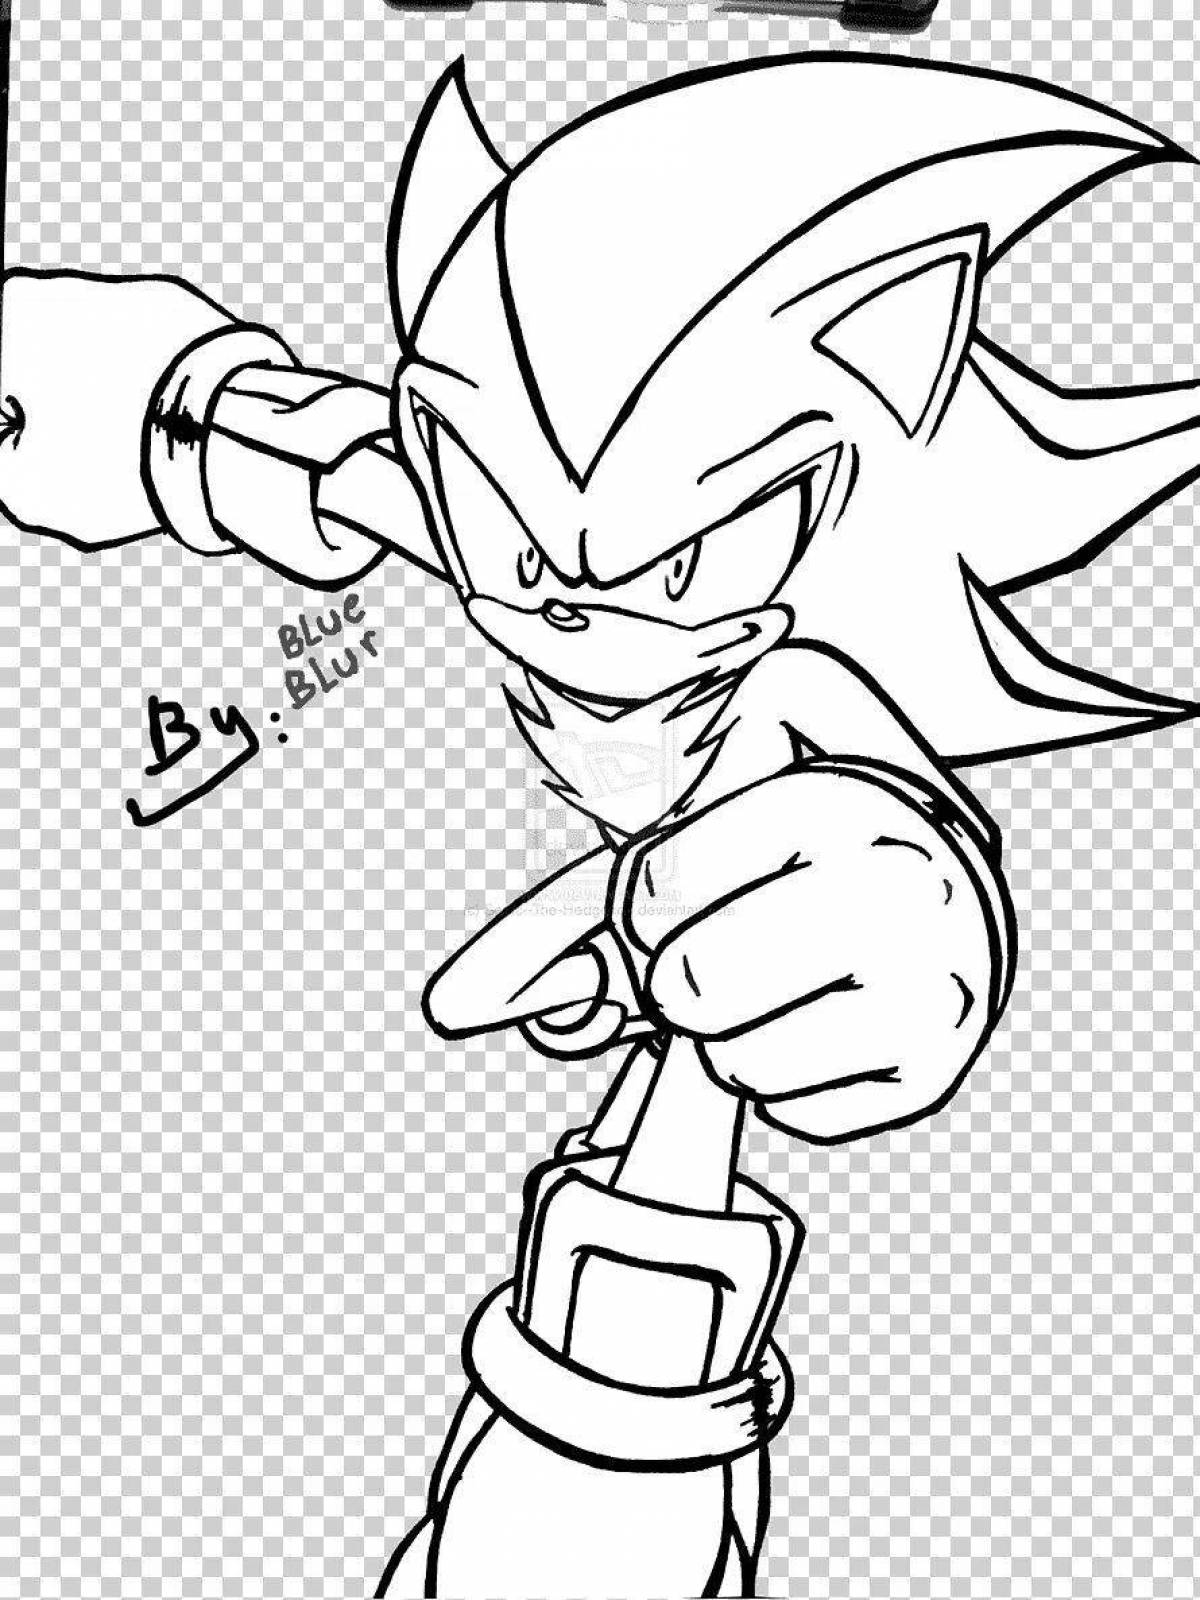 Fun infinity sonic coloring page